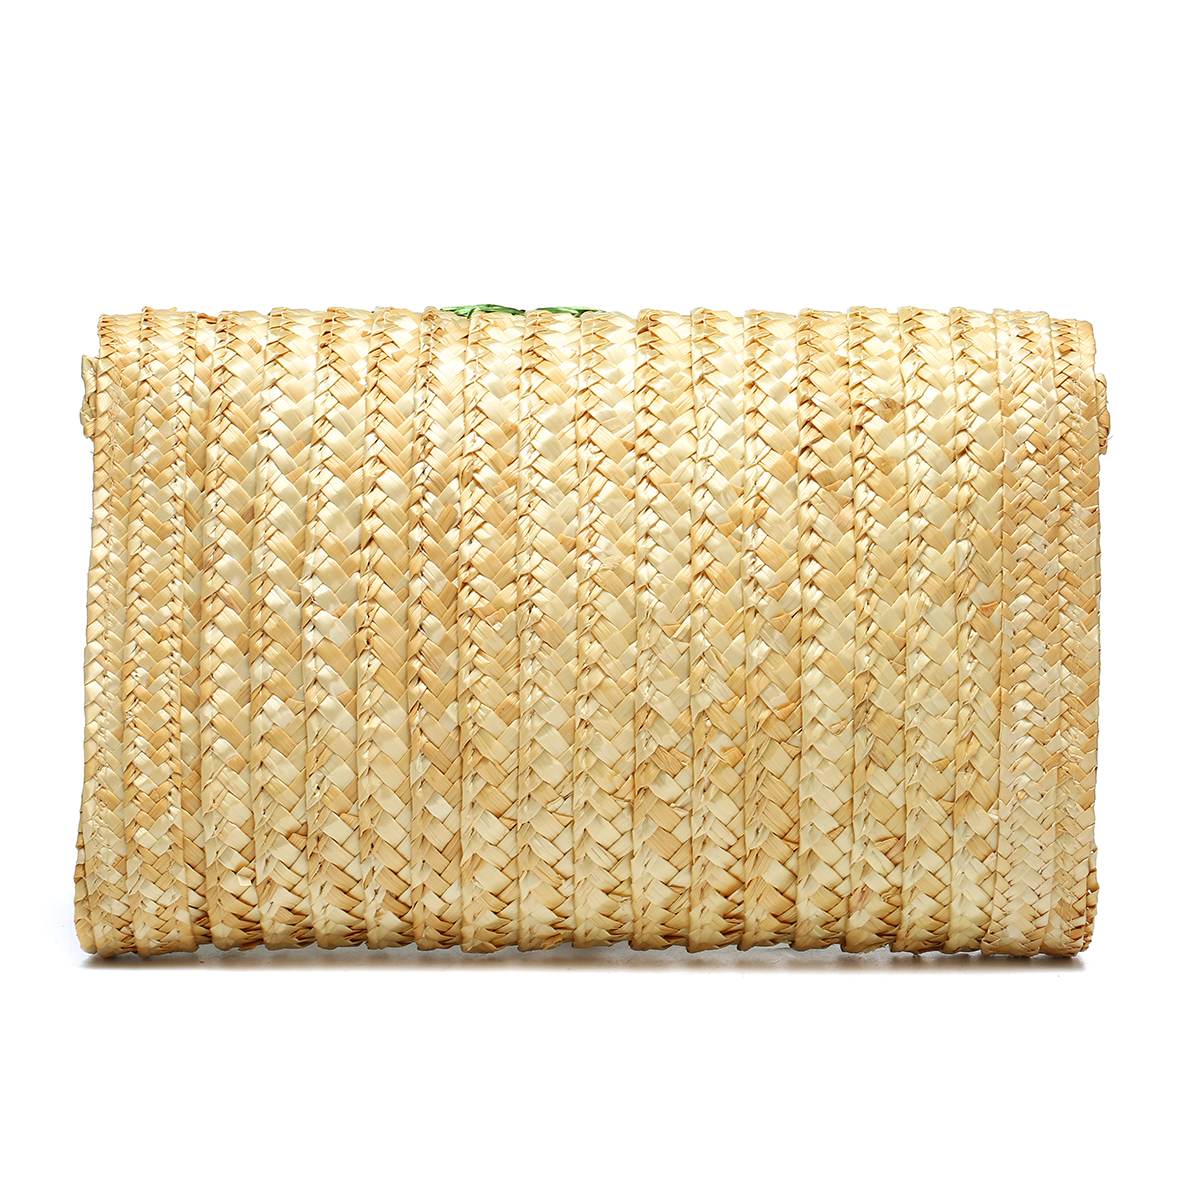 Find 1Pcs Straw Handbag Woven Handbags Single Layer Cute Three-dimensional Girls Bag School Home Supplies for Sale on Gipsybee.com with cryptocurrencies